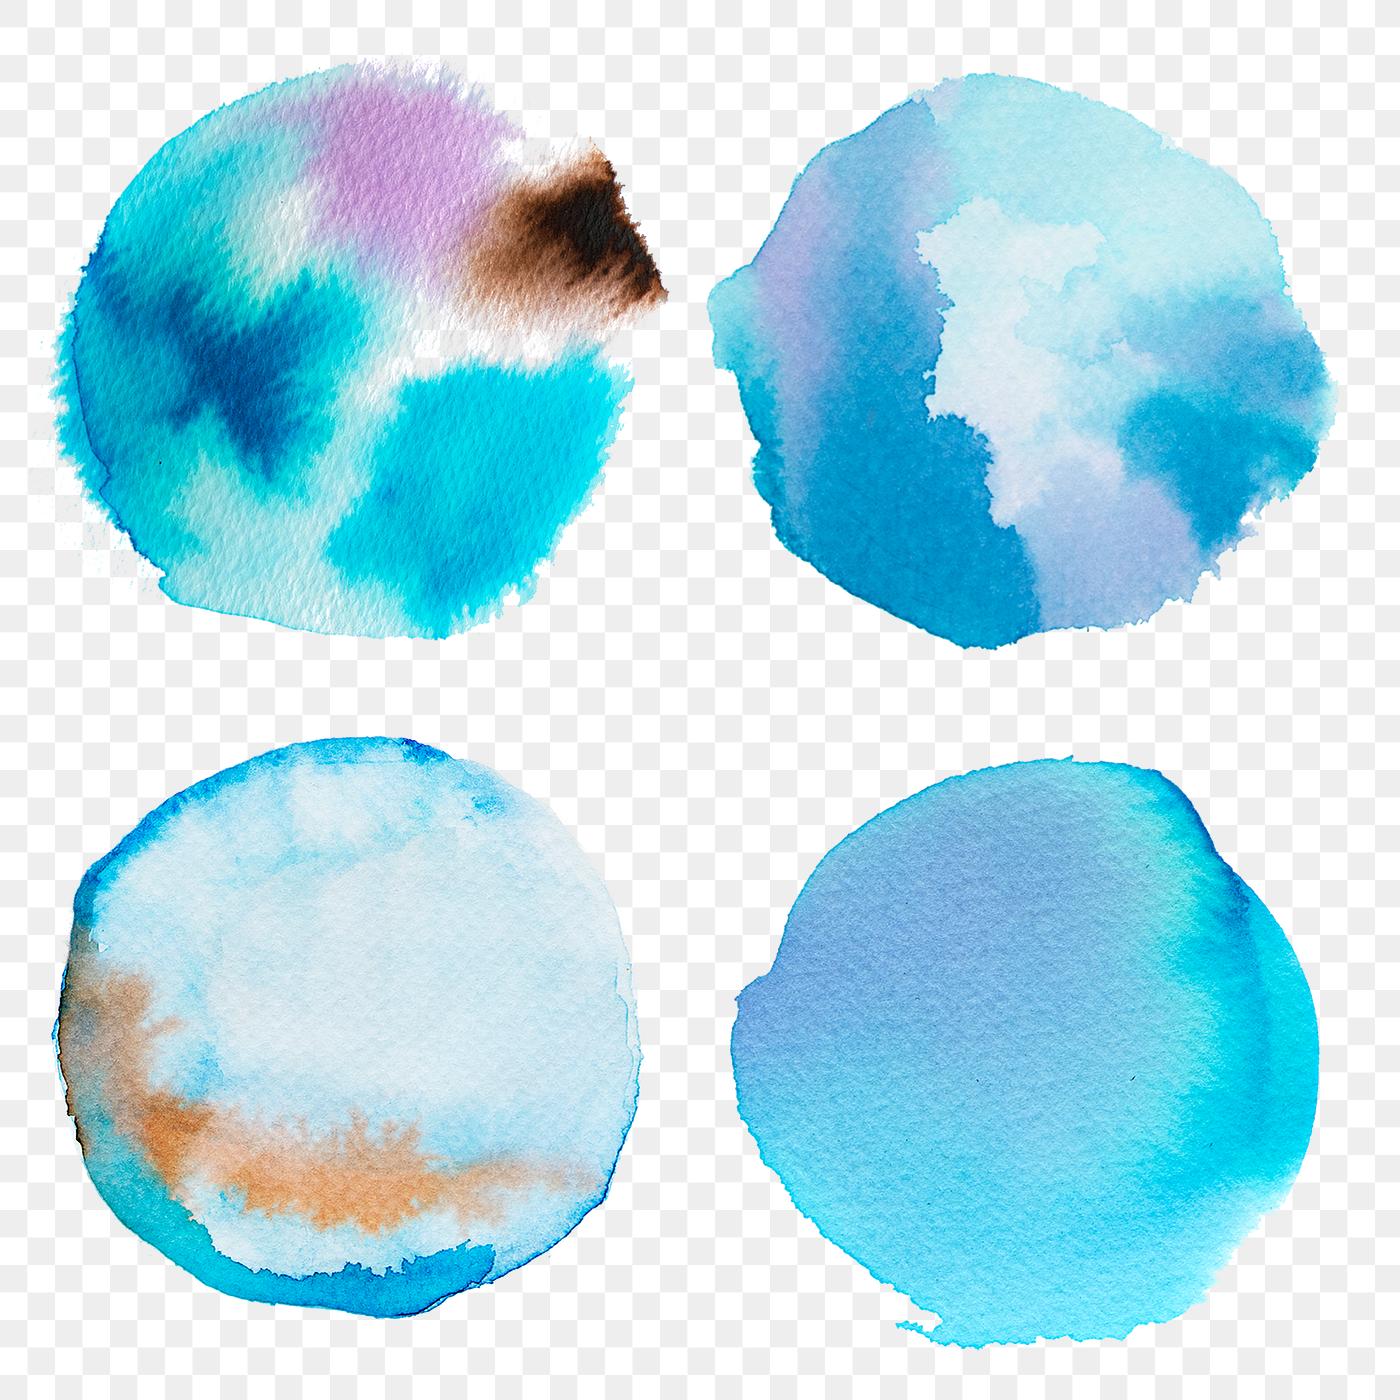  Round  watercolor  badges png  Free stock illustration 